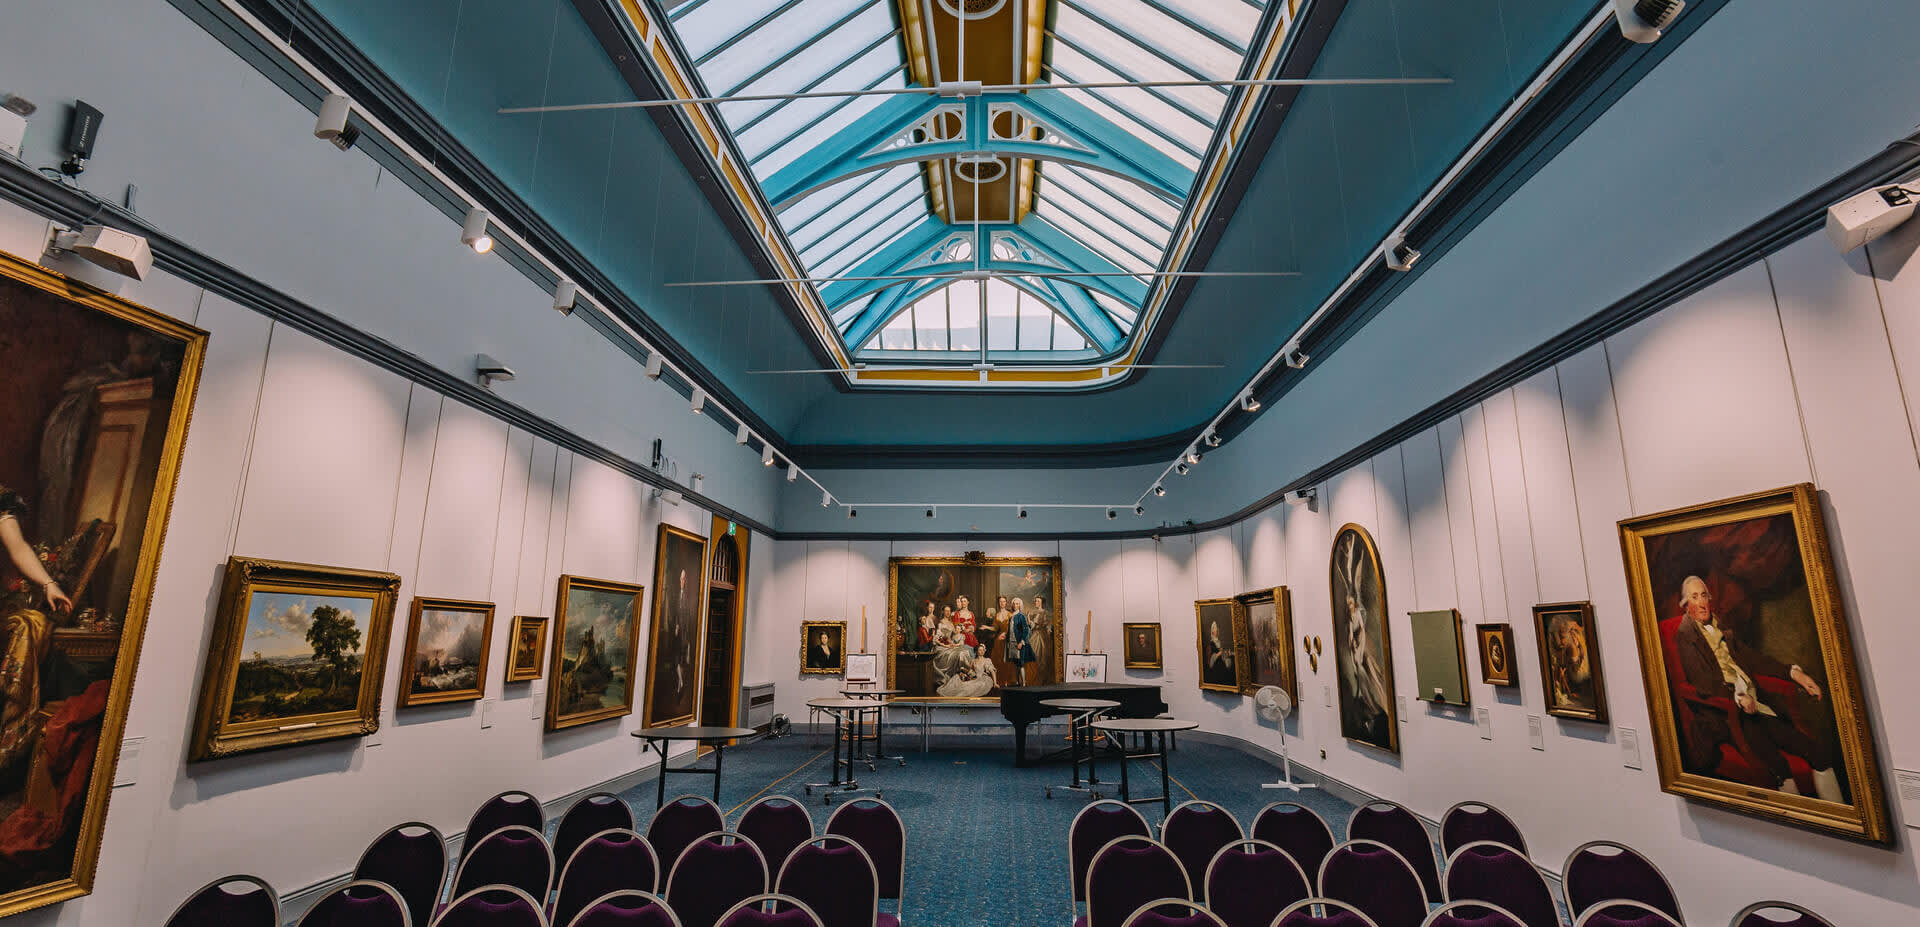 Portraits and paintings line the wall of Wolverhampton Art Gallery beneath an exquisite skylight